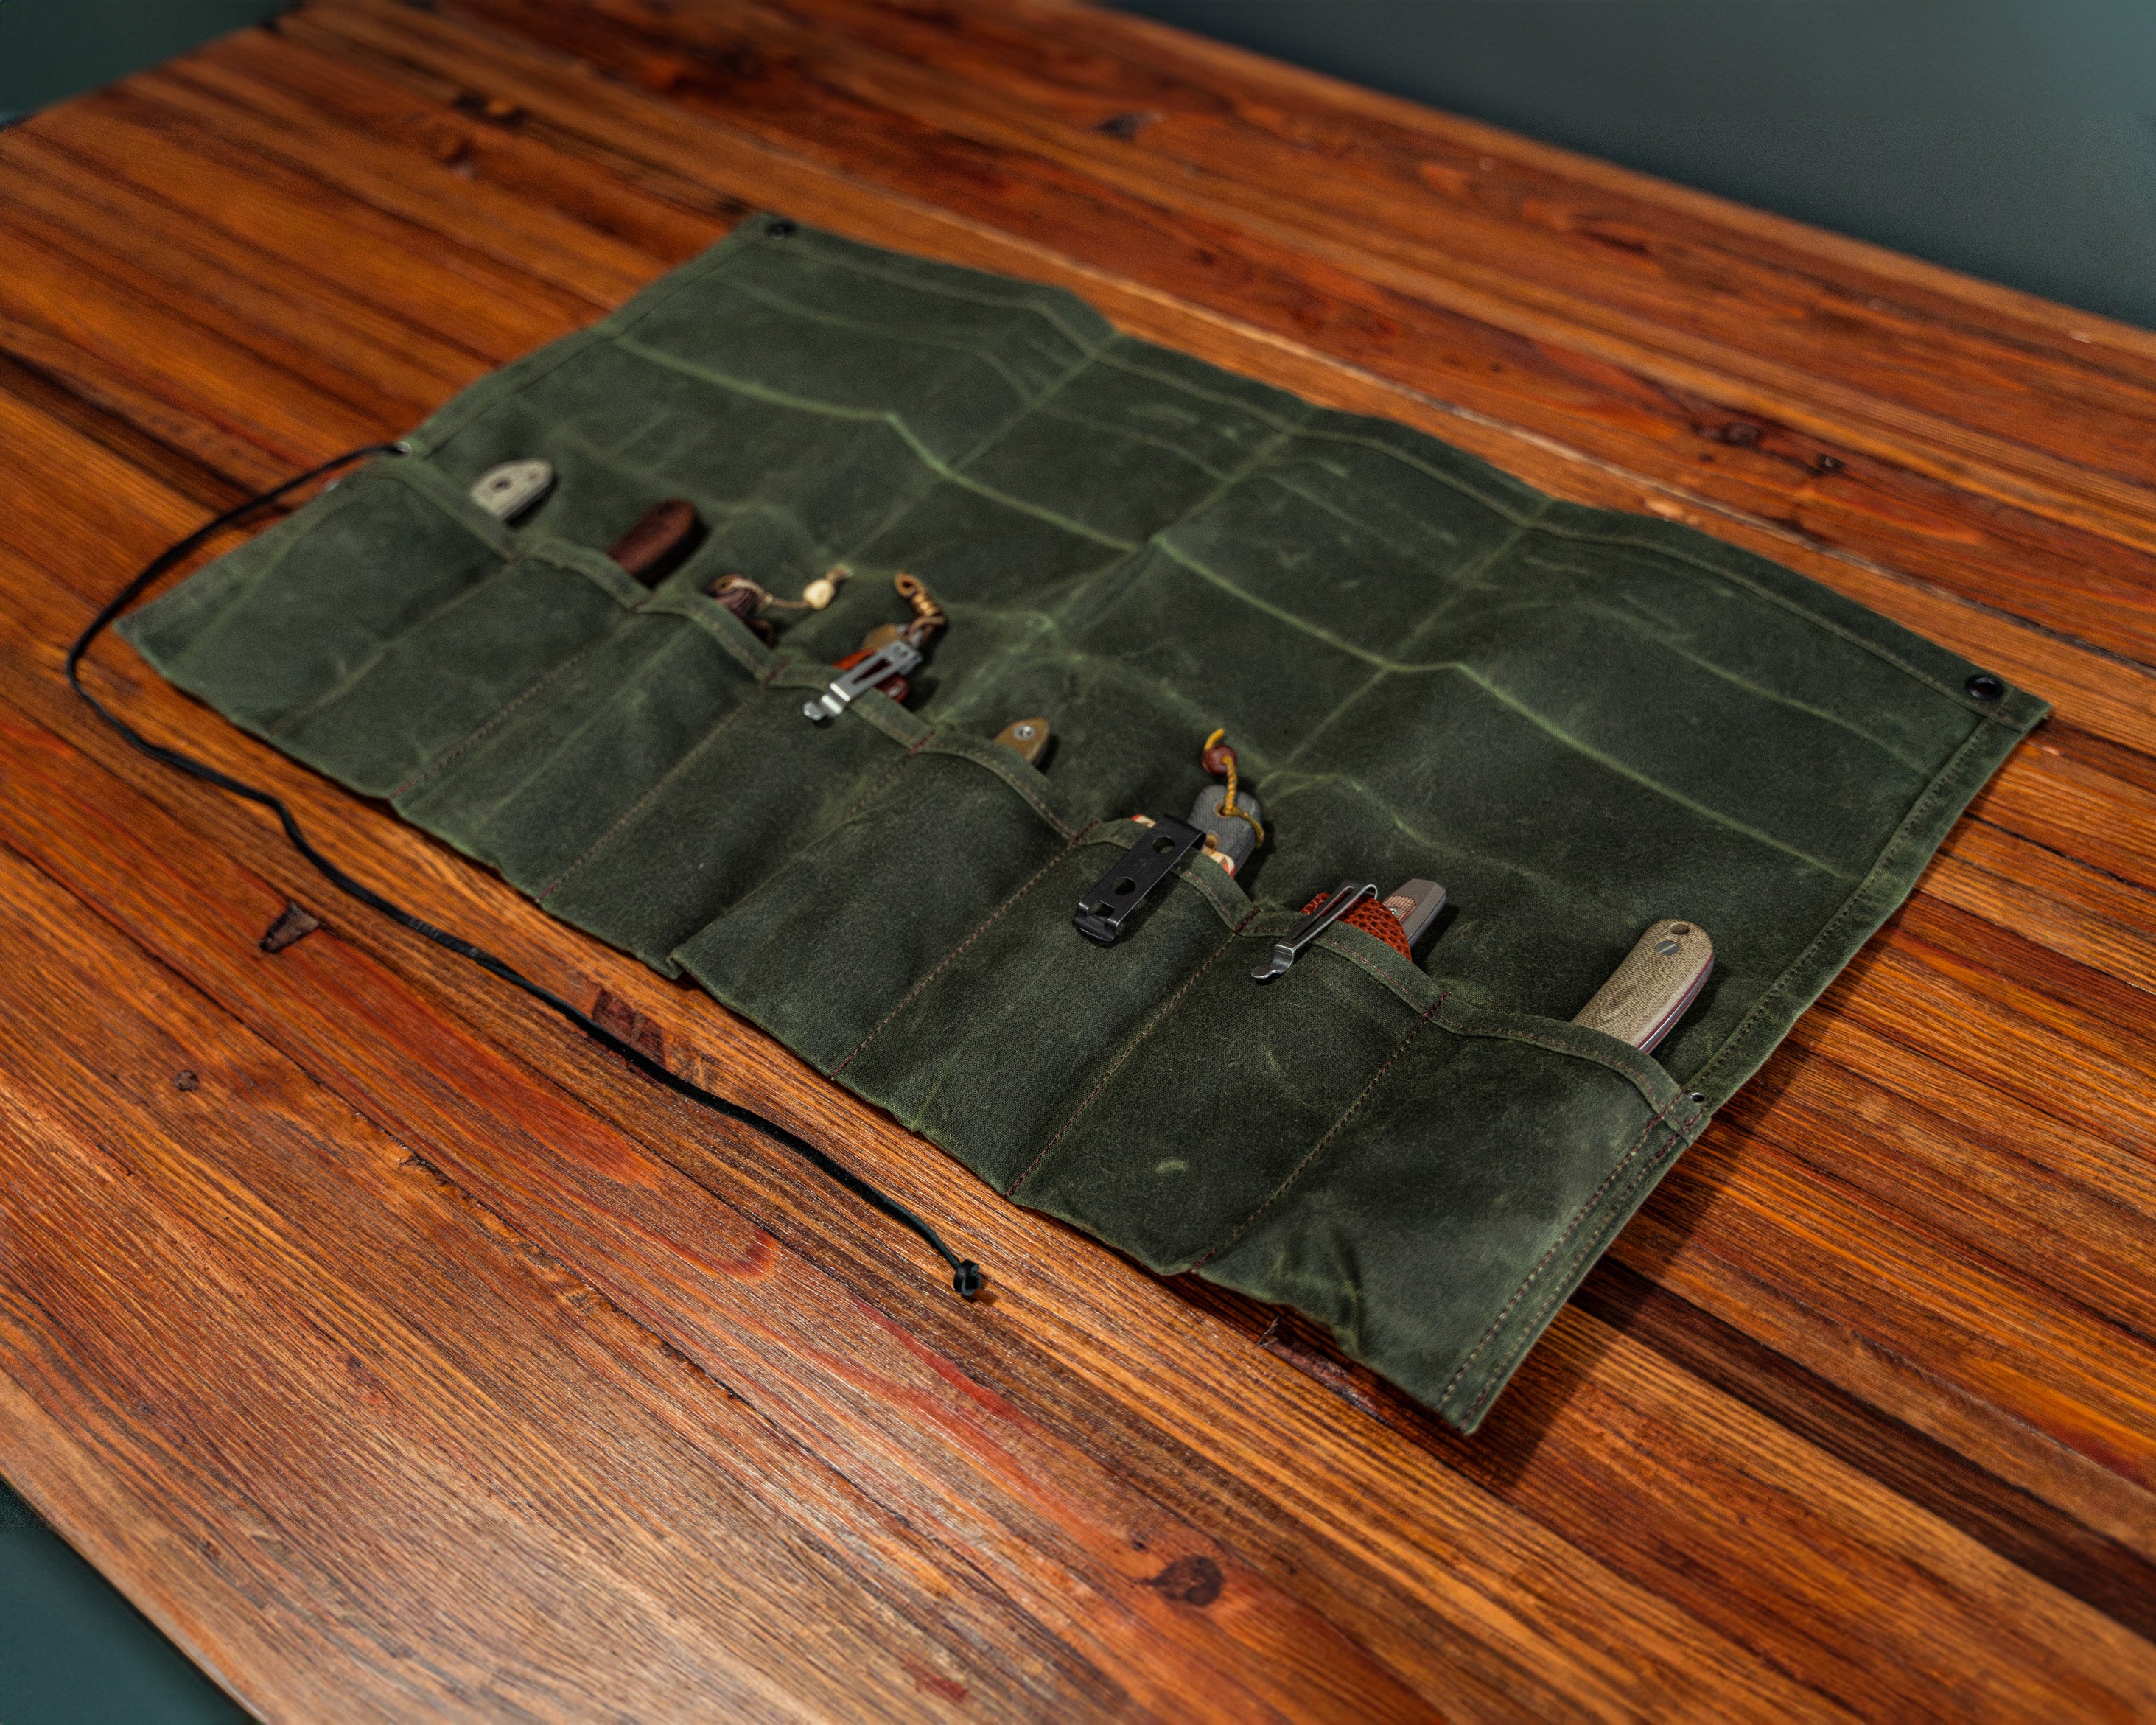 Zoomed out view of the open Birch Waxed Canvas Knife Roll with knives inside of it on a wooden surface